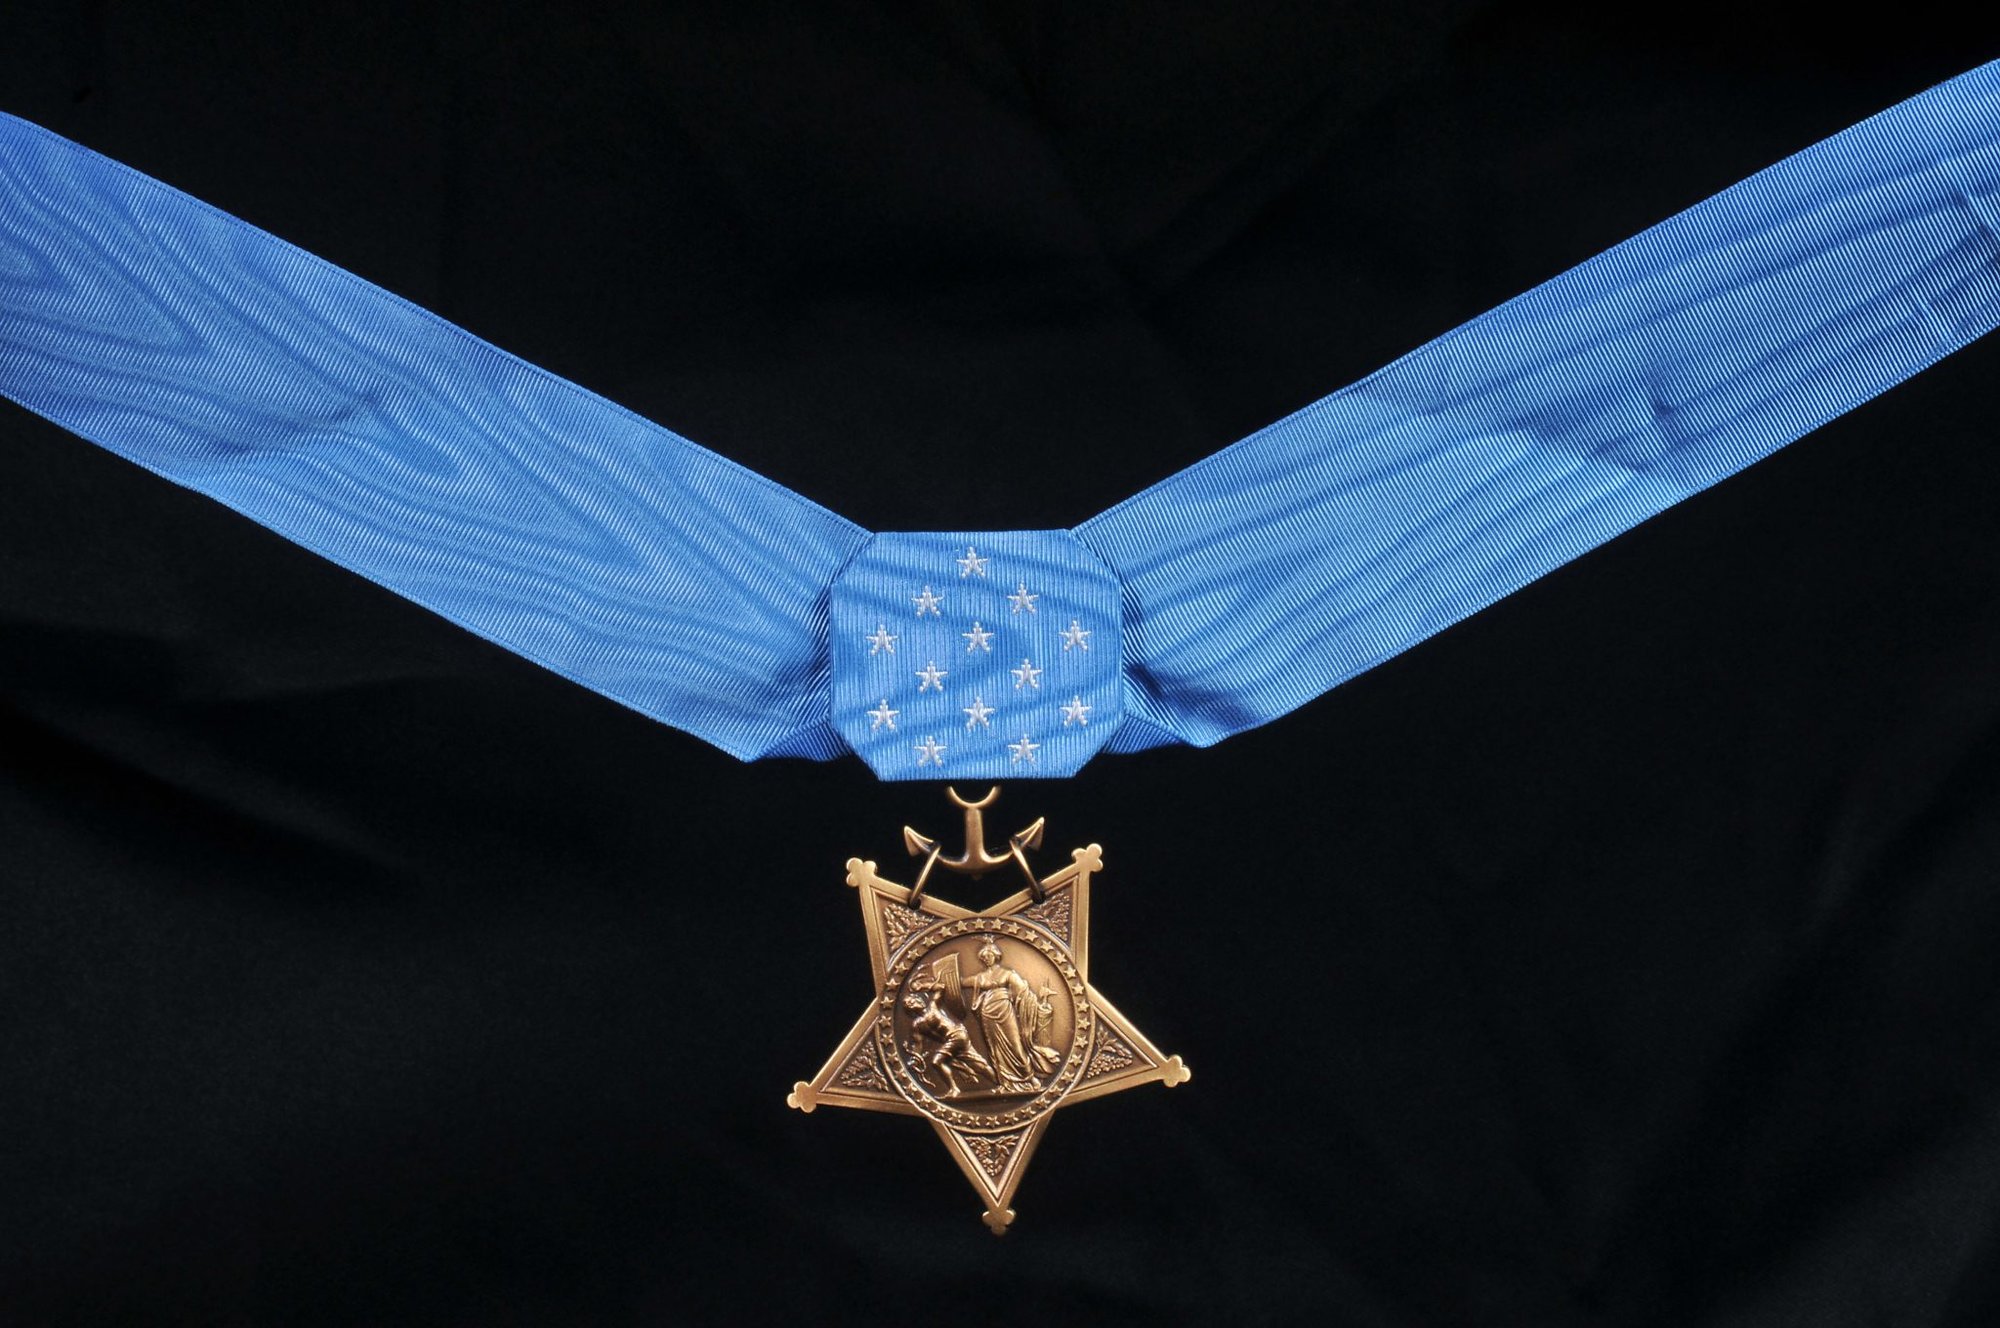 160218-N-ED767-110
WASHINGTON (Feb. 18, 2016) The Medal of Honor will be awarded to Senior Chief Special Warfare Operator (SEAL) Edward C. Byers Jr. by President Barack Obama during a White House ceremony Feb. 29. Byers is receiving the medal for his actions during a 2012 rescue operation in Afghanistan. (U.S. Navy photo/Released)